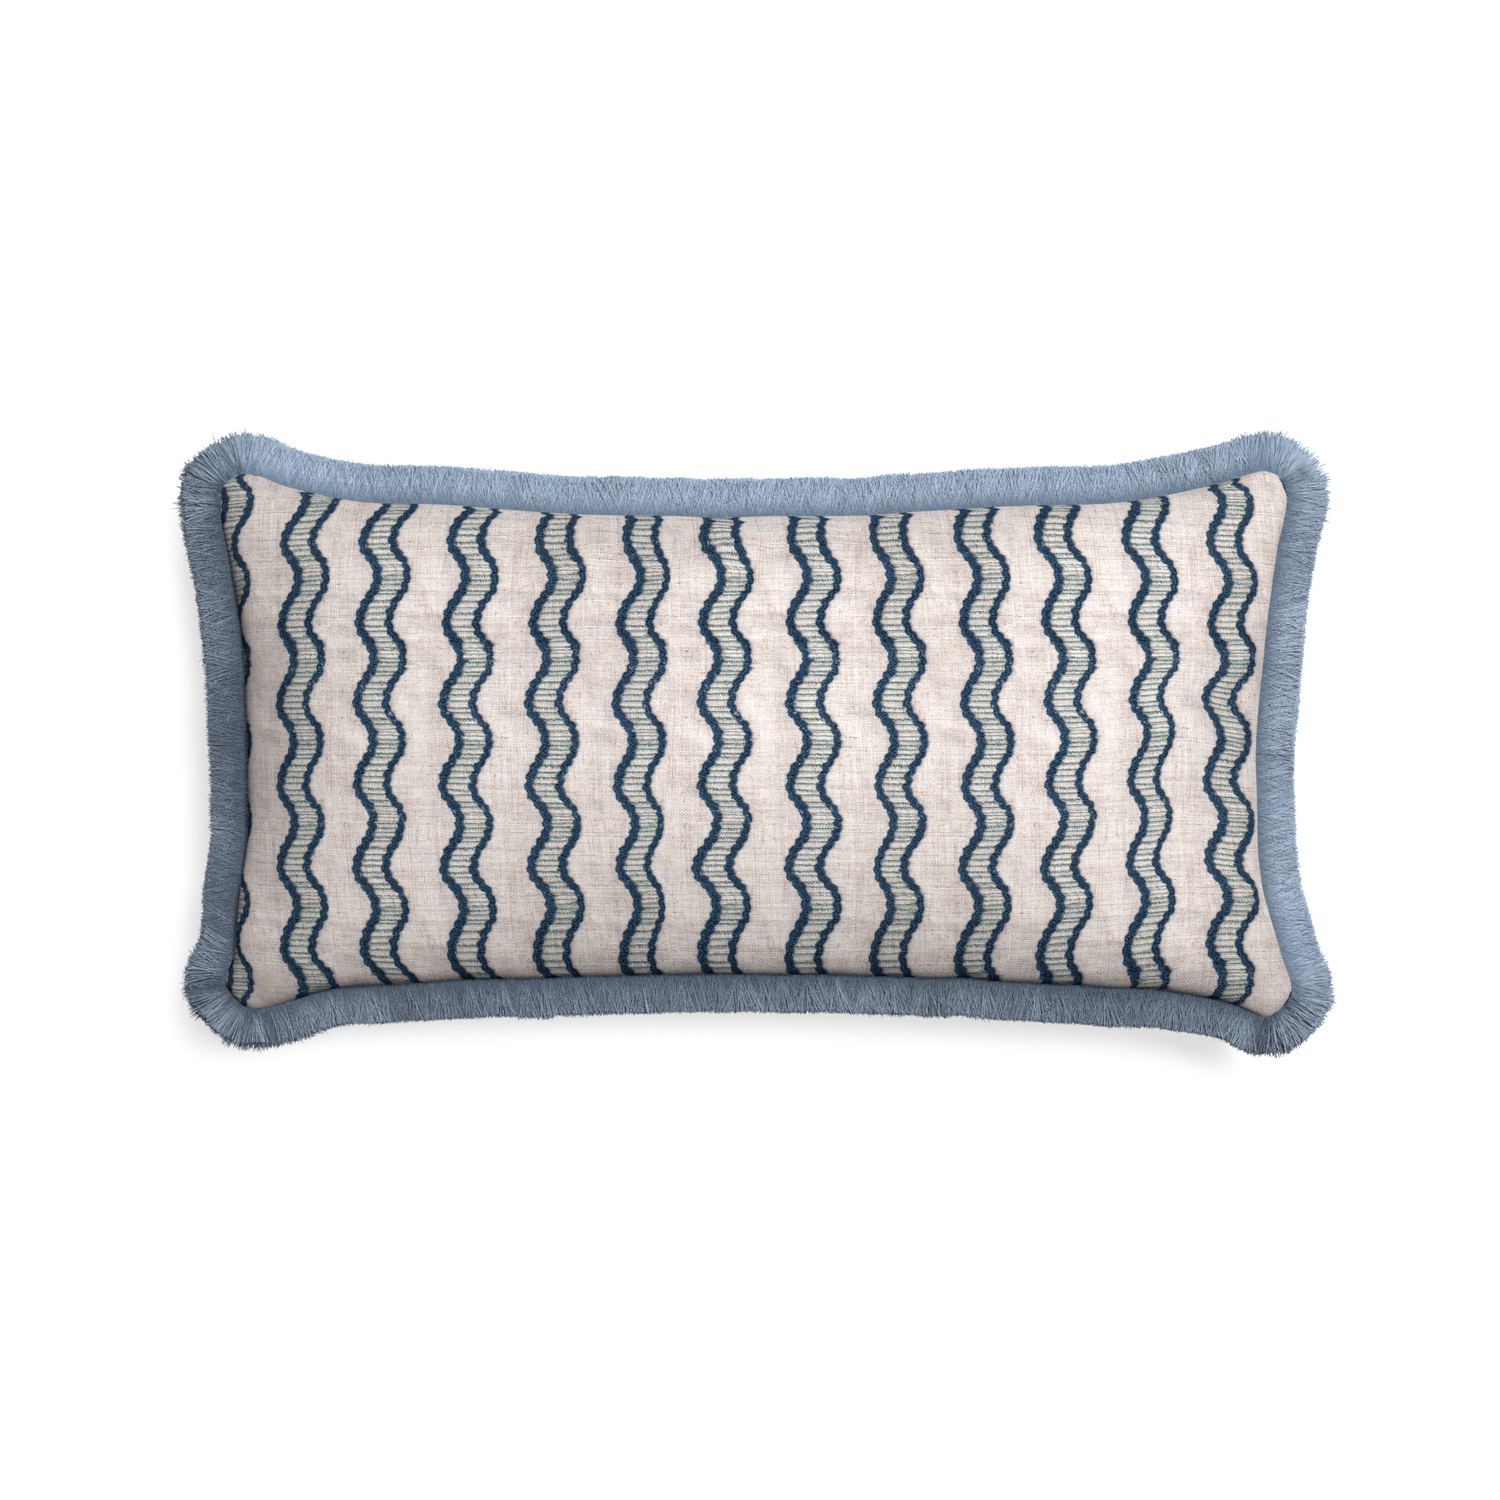 Midi-lumbar beatrice custom embroidered wavepillow with sky fringe on white background